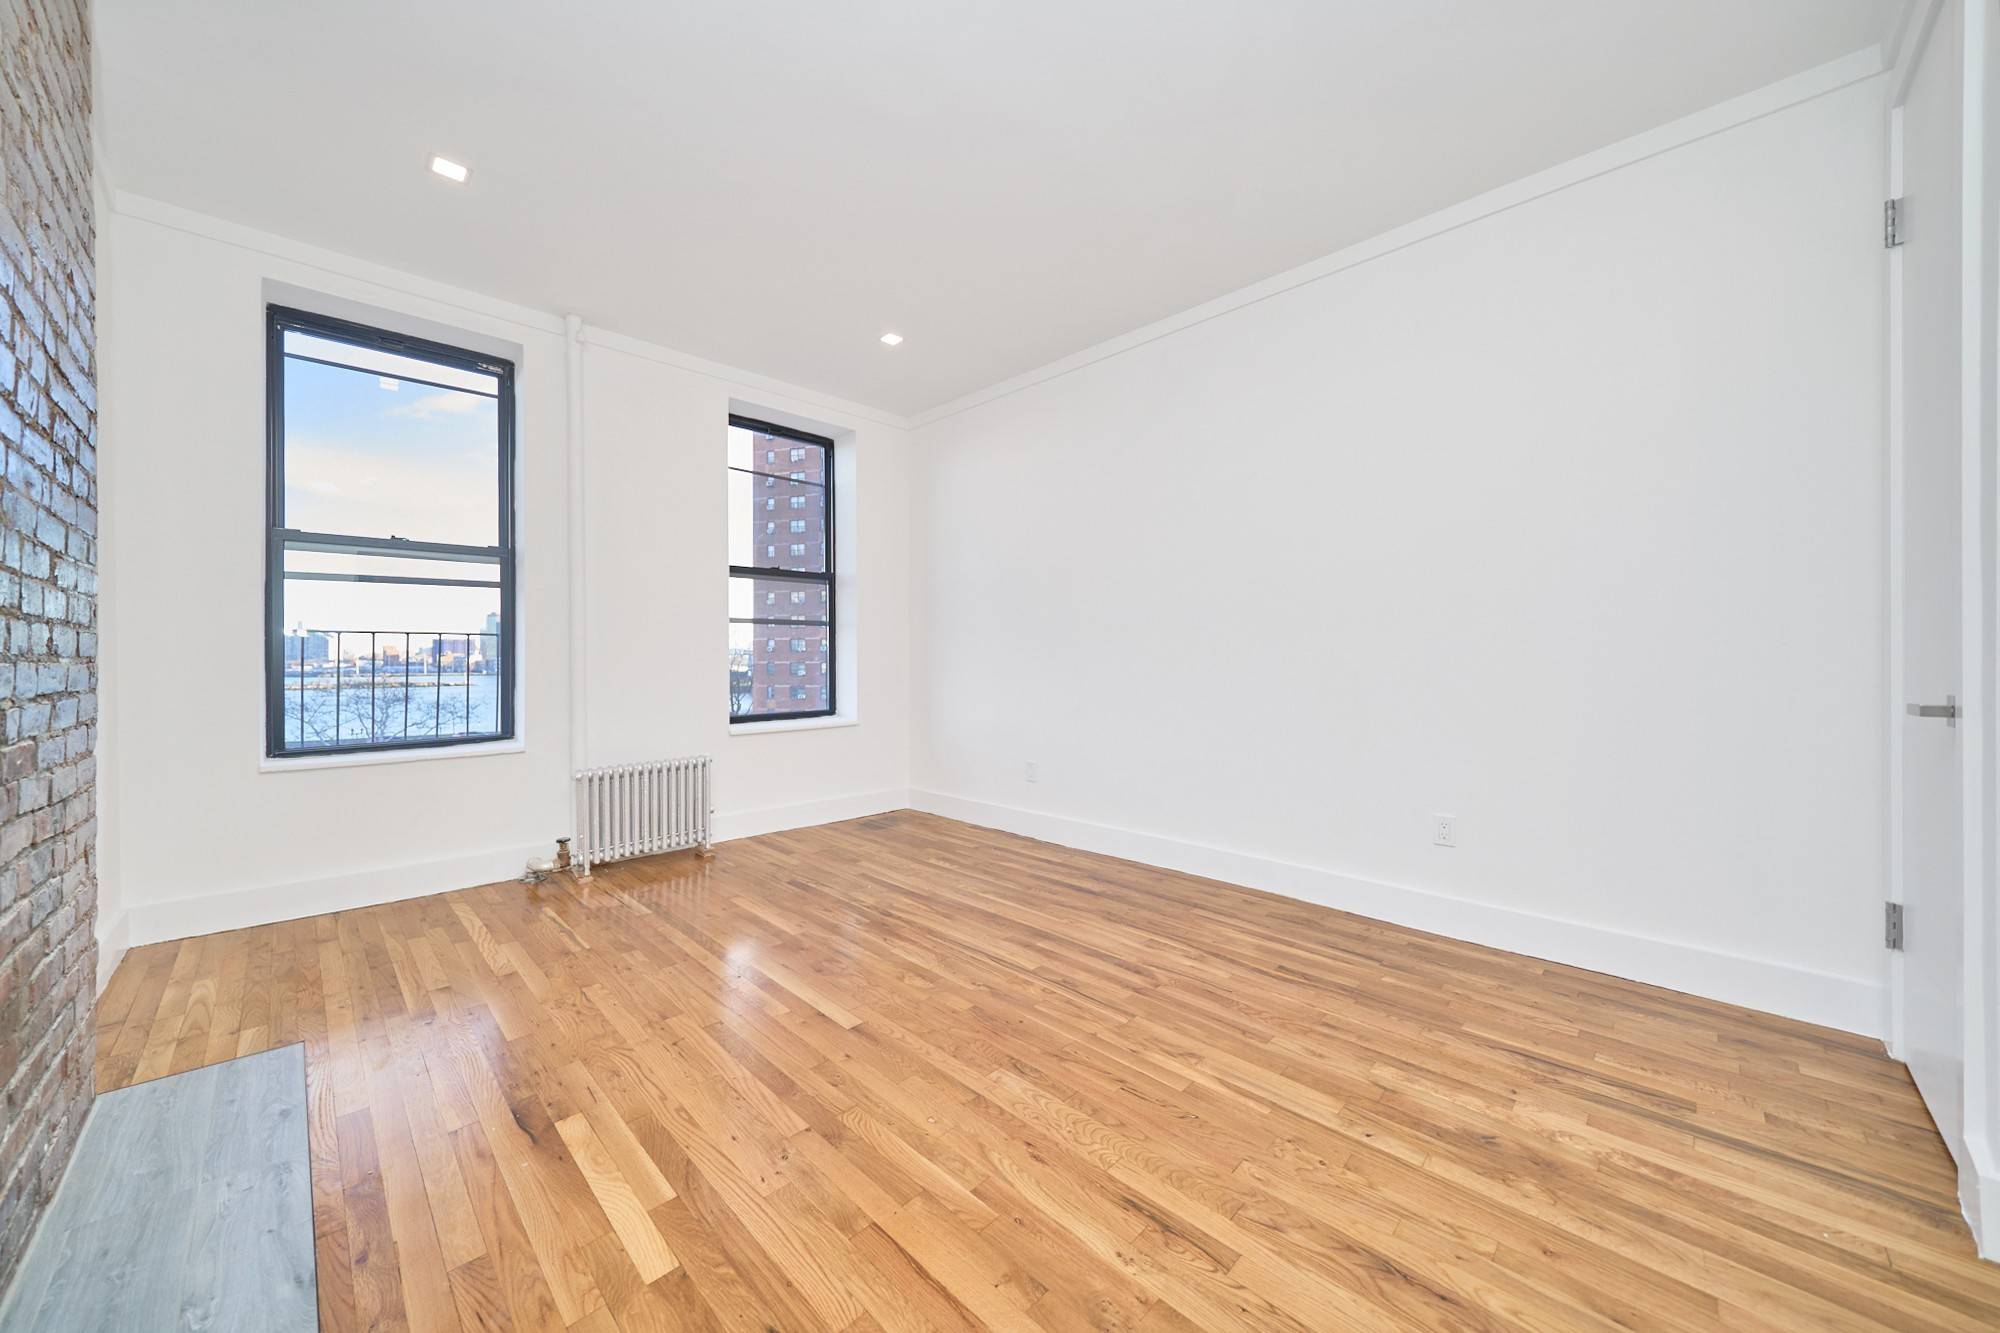 INQUIRE FOR VIDEOAVAILABLE MAY 1BRAND NEW RENOVATIONLive in this beautifully gut renovated, never before lived in 1BR 1BA apartment in a brand new building with a water view overlooking First ...